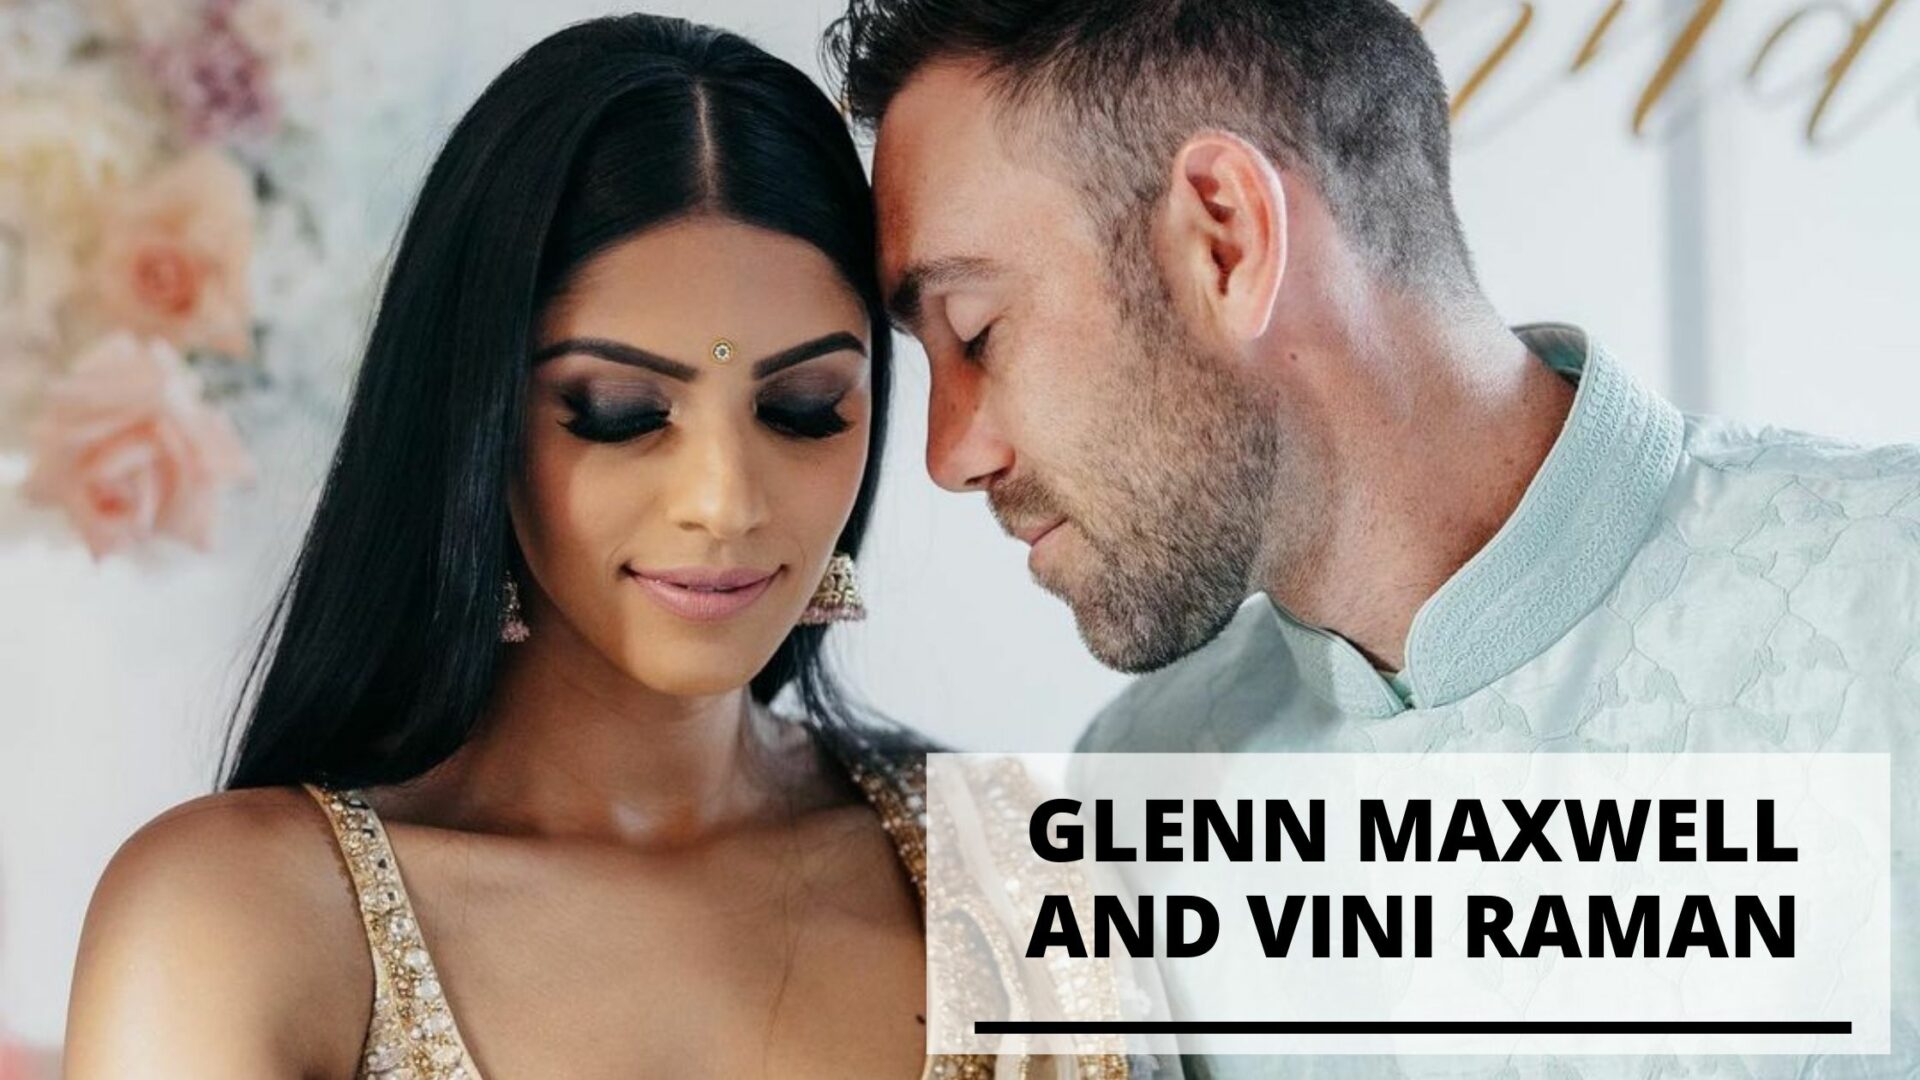 You are currently viewing 10 Best Photos of Glenn Maxwell and Vini Raman’s Wedding